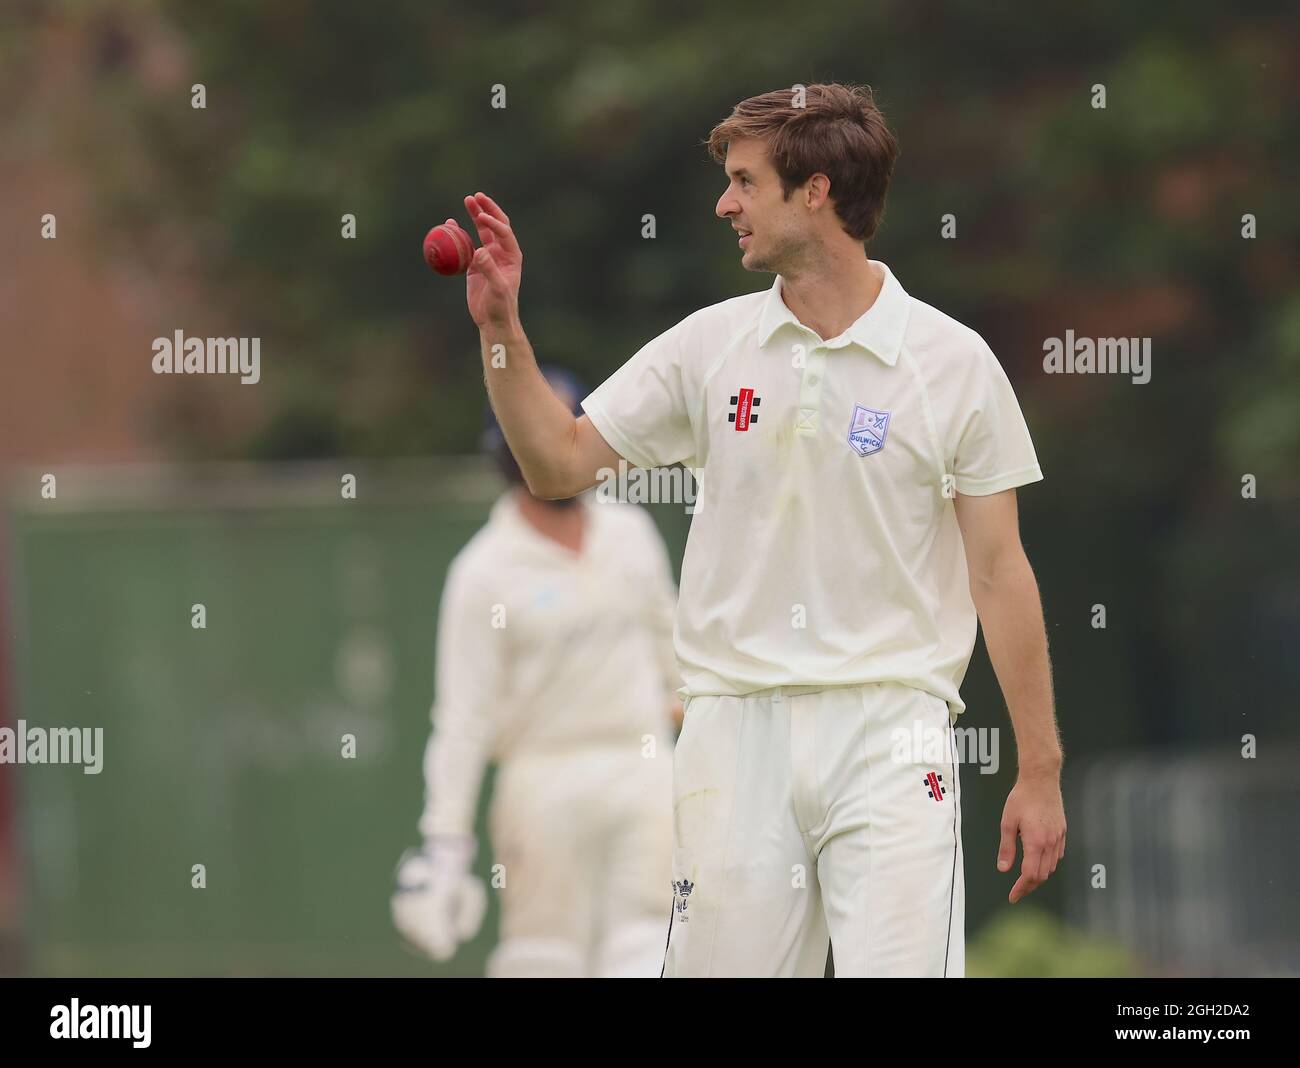 London, UK. 4 September, 2021. South London, UK. Jon Lodwick bowling as Dulwich Cricket Club take on Dorking CC in the Surrey Championship Division 2 match at Dulwich, South London. David Rowe/ Alamy Live News Stock Photo